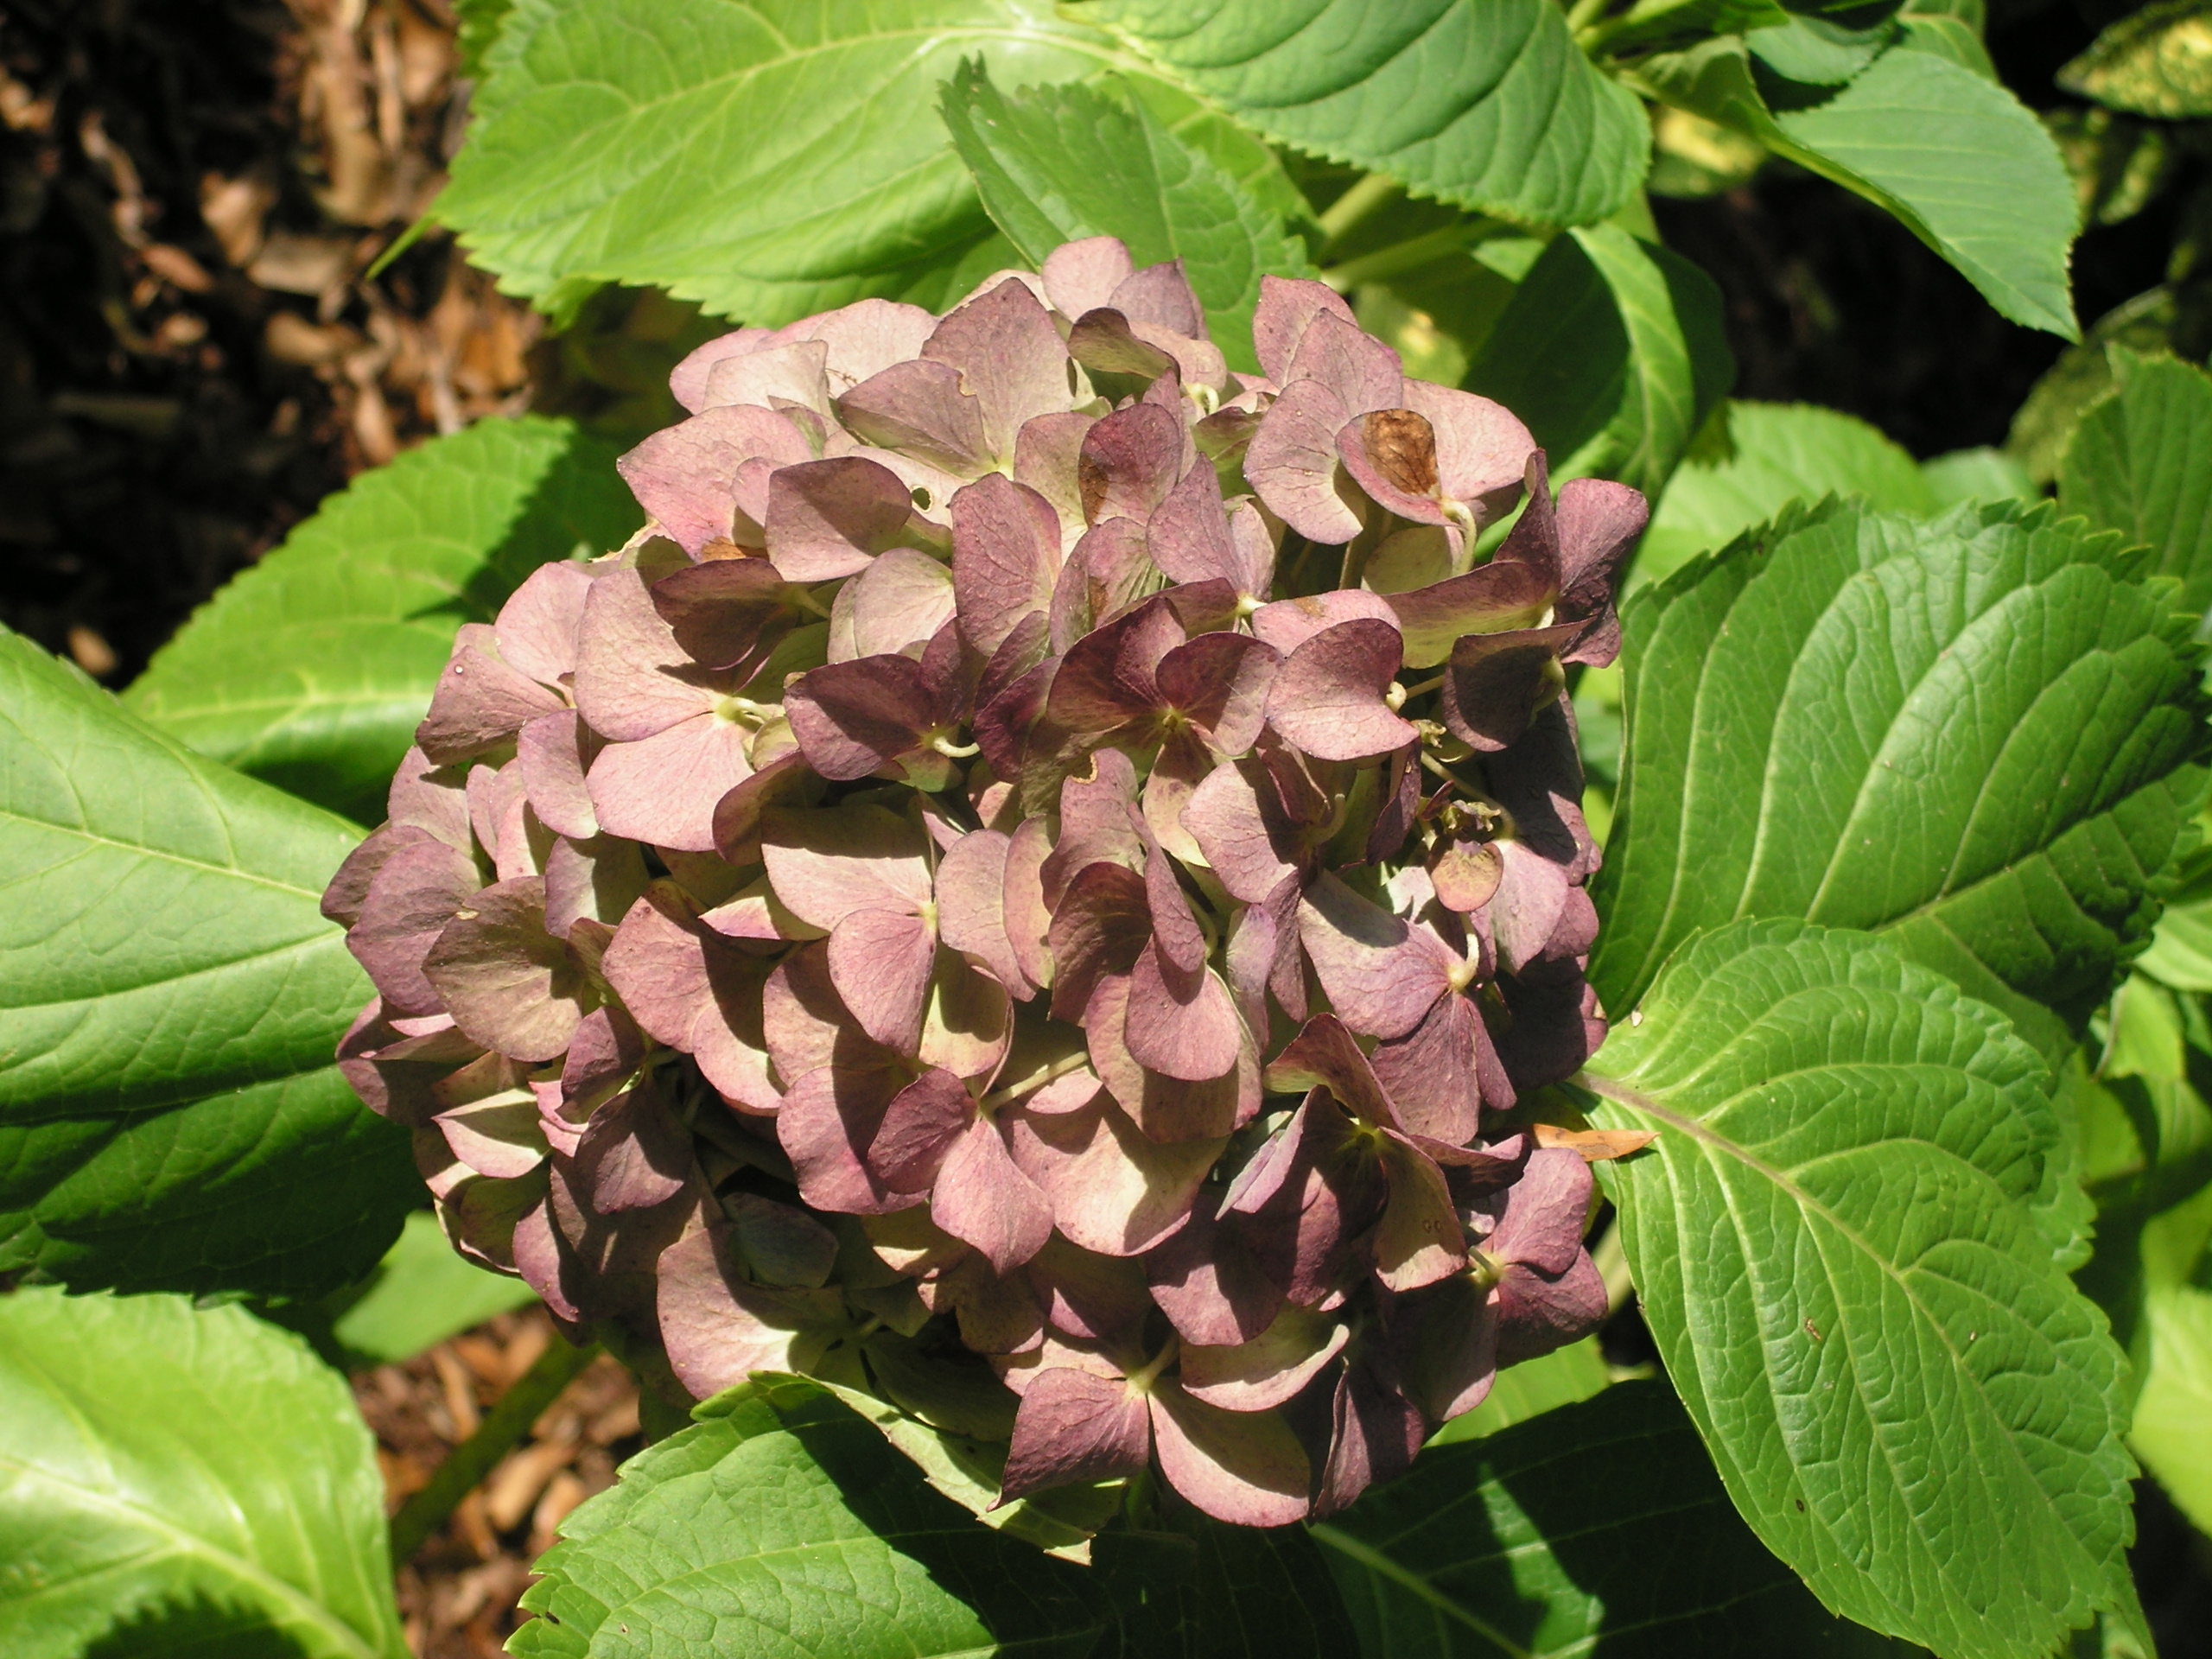 The electric blue of the hydrangeas have dried to gray.  